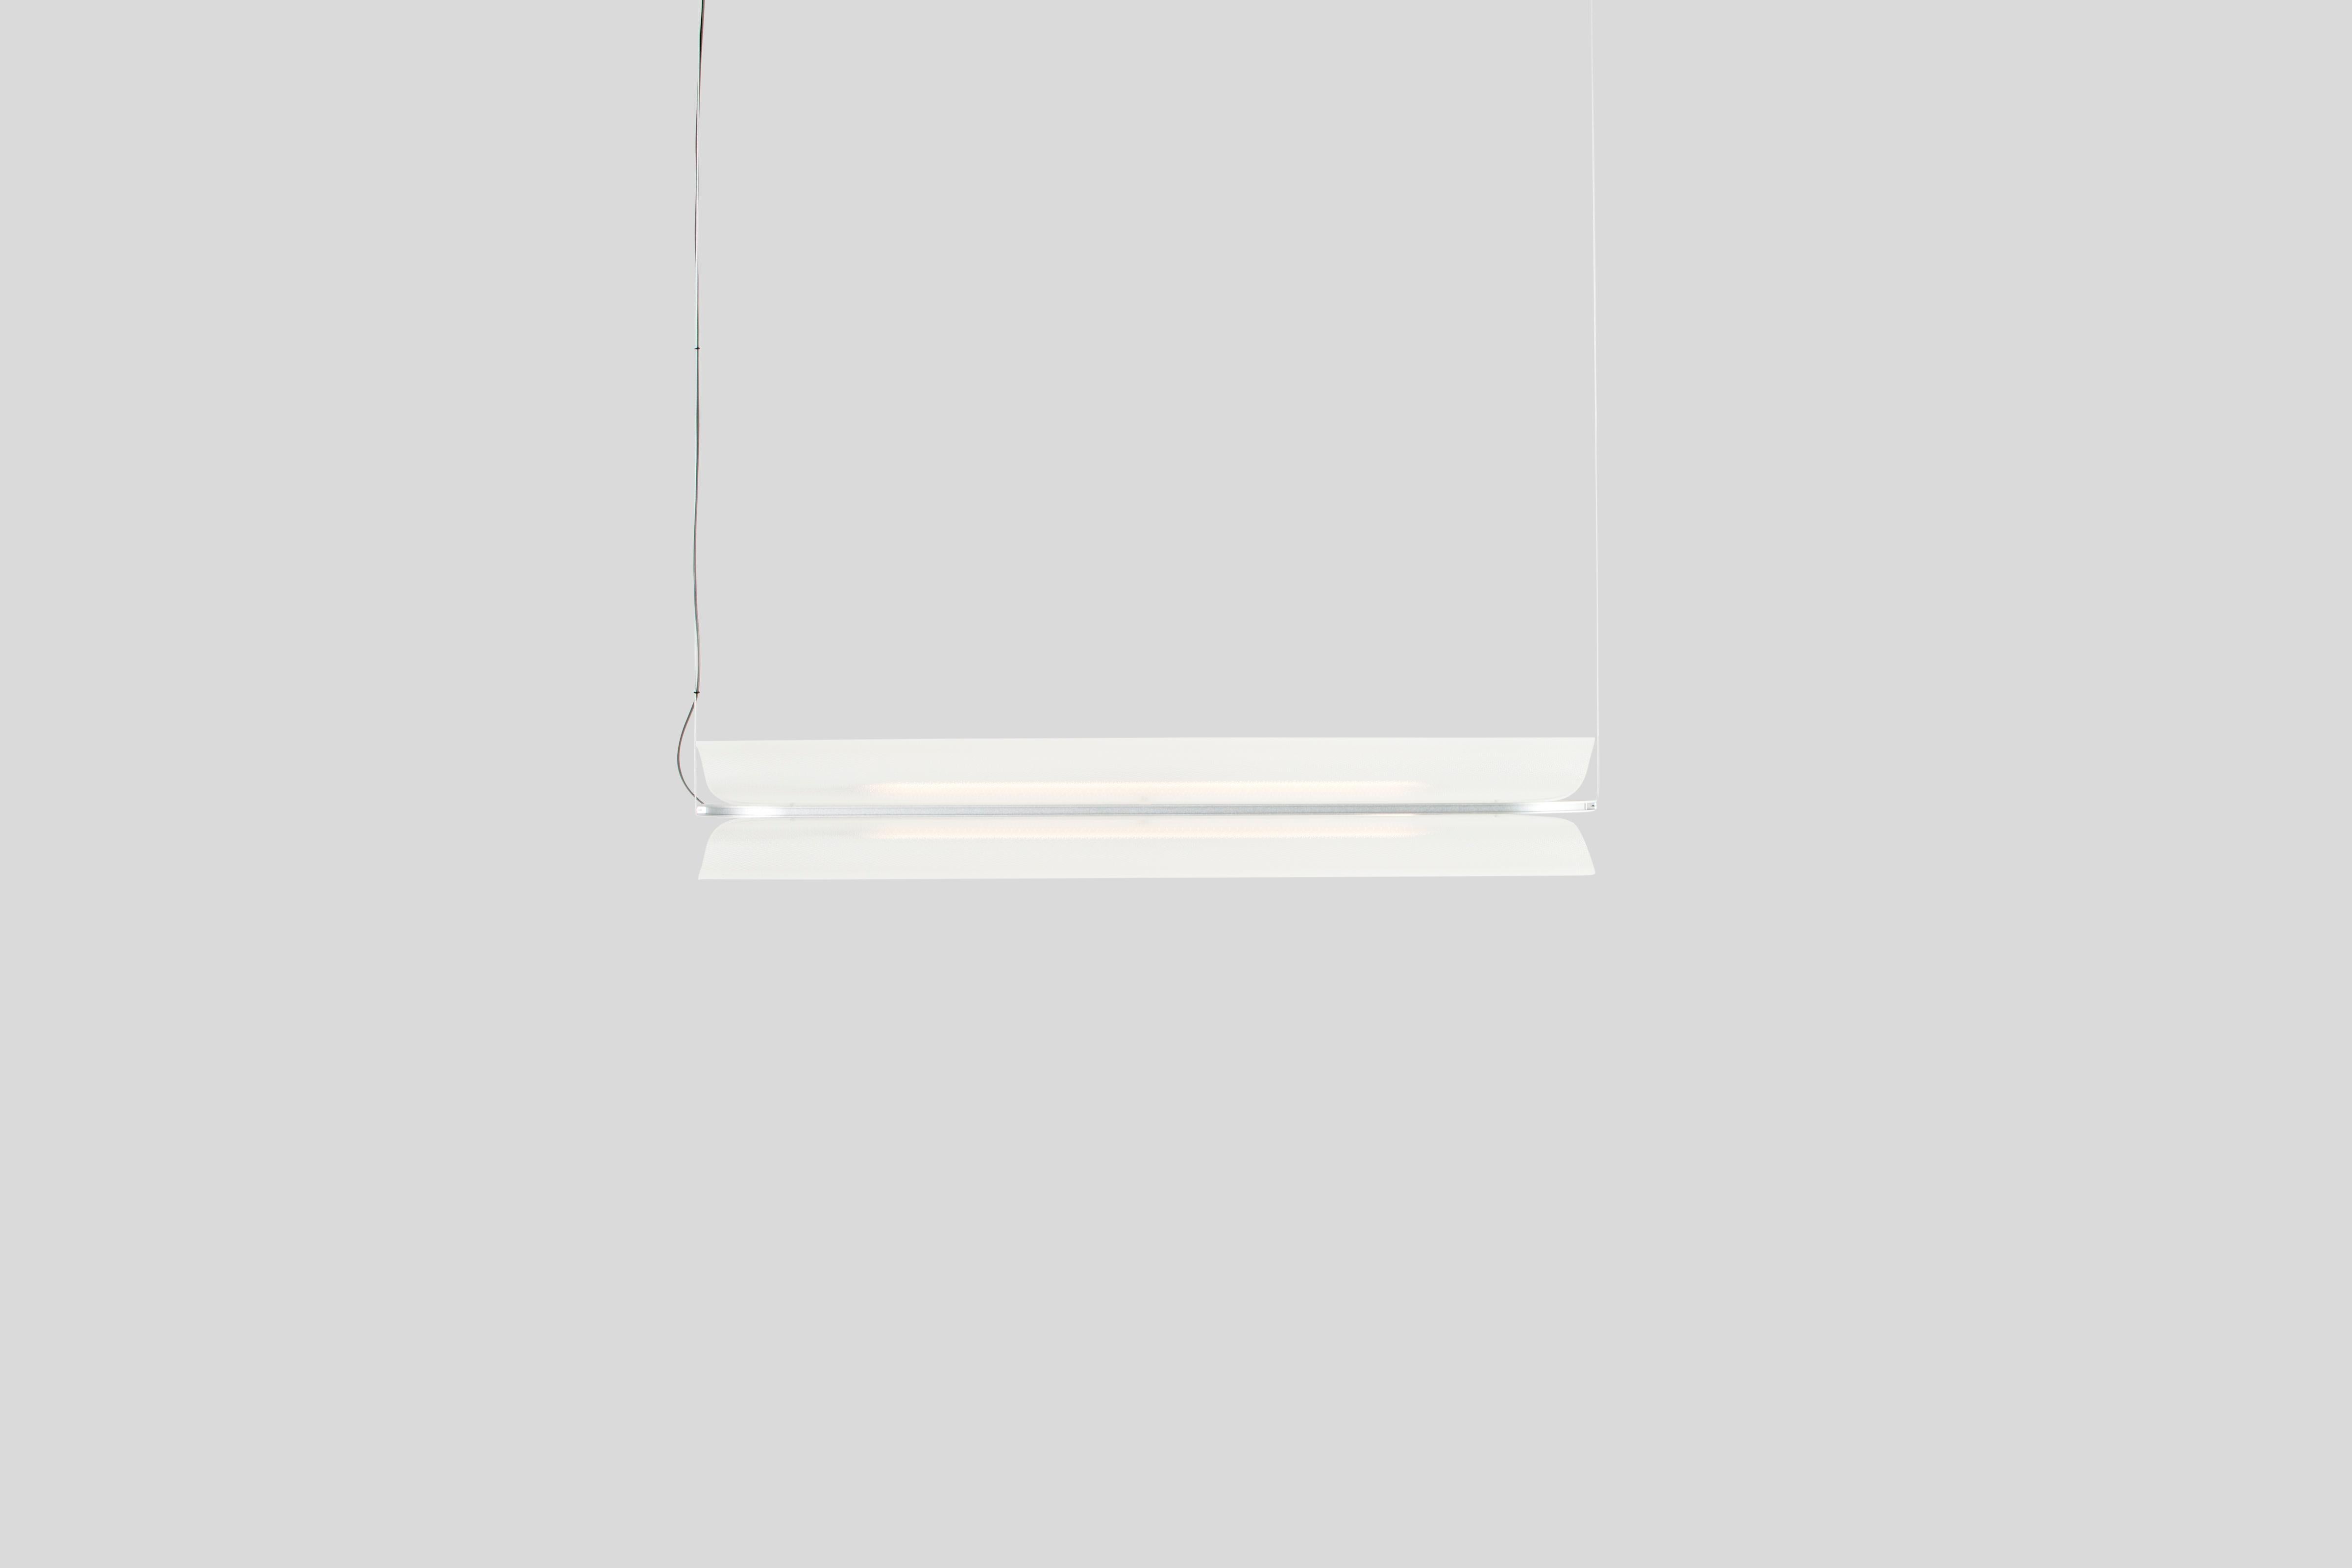 VALE - Pendant Lamp
Design: Caine Heintzman, Editor: ANDLight

The Vale series optimises functionality through its multidirectional luminescence while diffusing soft ambient light.

Materials
– Acrylic
– Aluminum

Dimensions
102 x 30 x 23